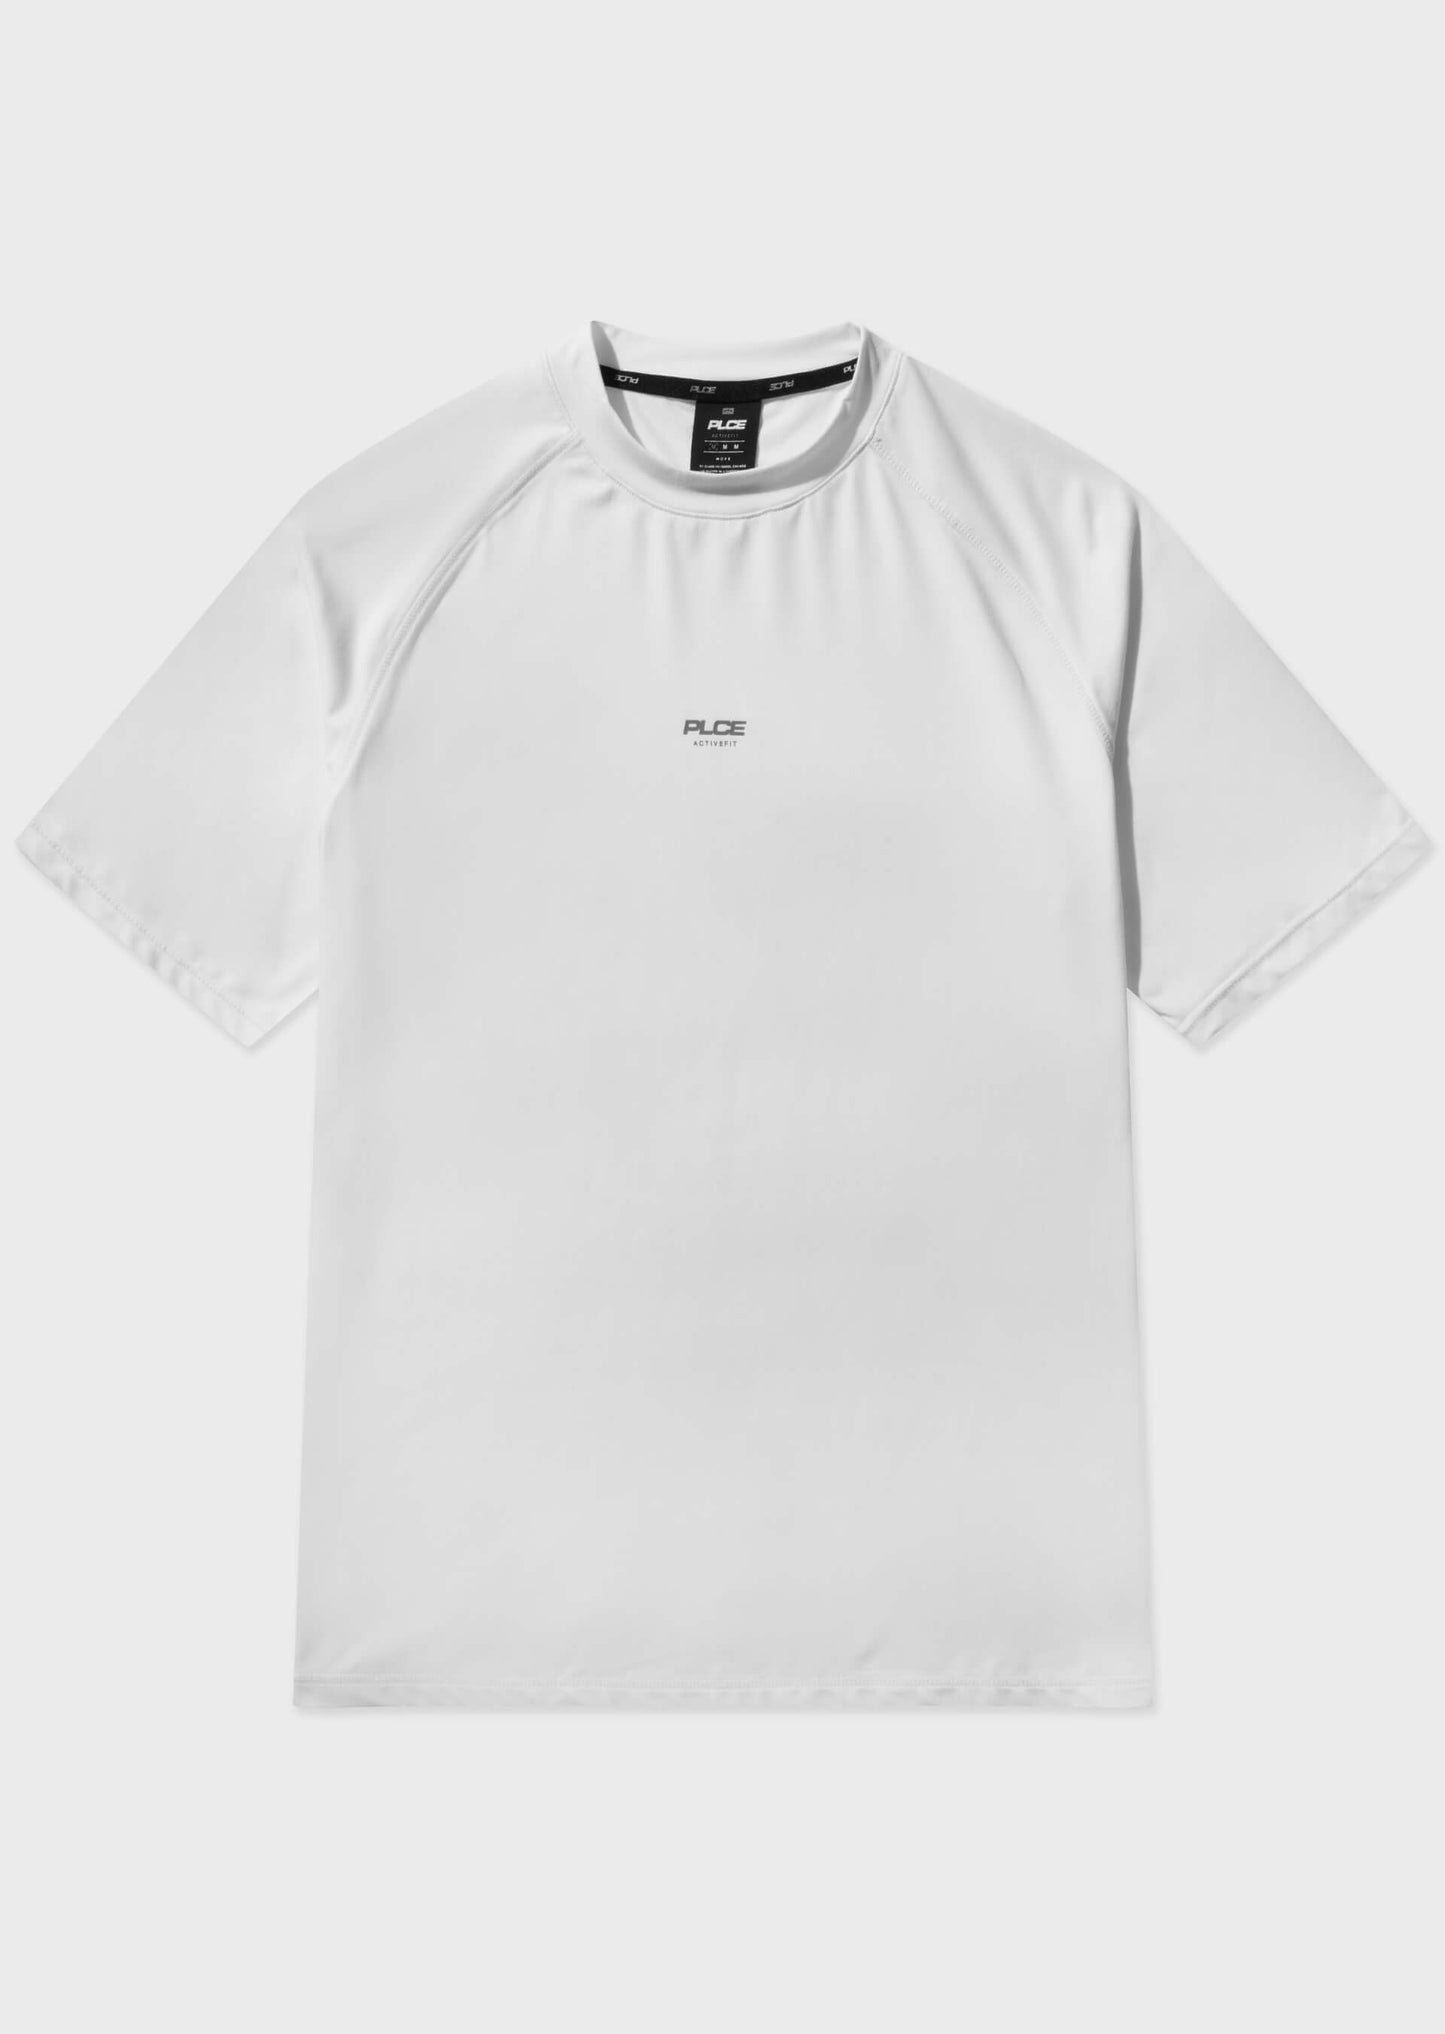 Cleat White T-Shirt